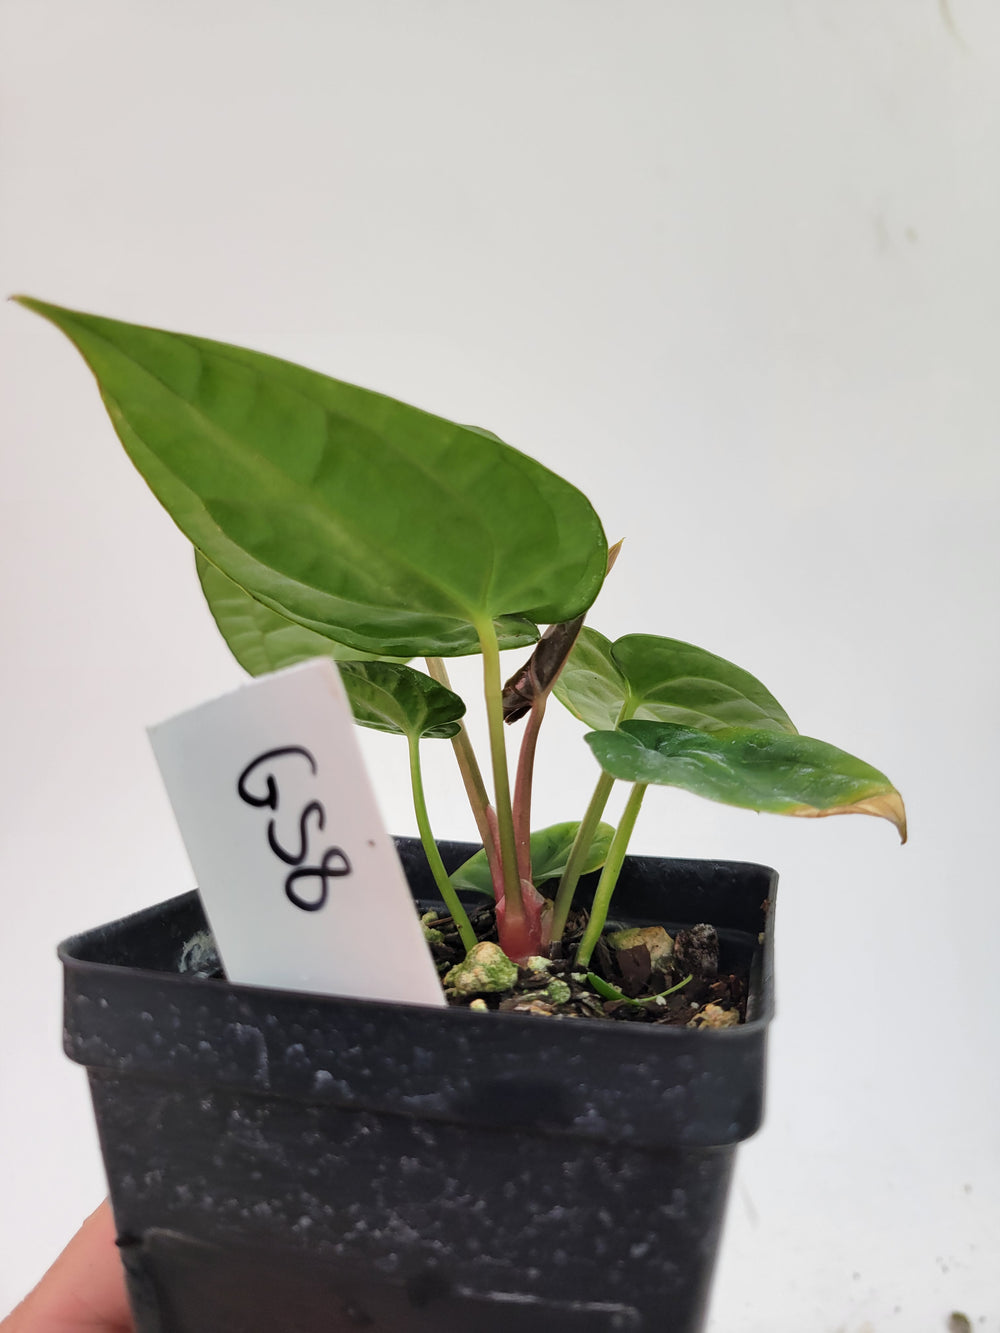 Anthurium Hoffmannii X  A. Luxurians , New Hybrid by NPGP, exact plant pictured,  seed Grown. US seller, #G58 - Nice Plants Good Pots